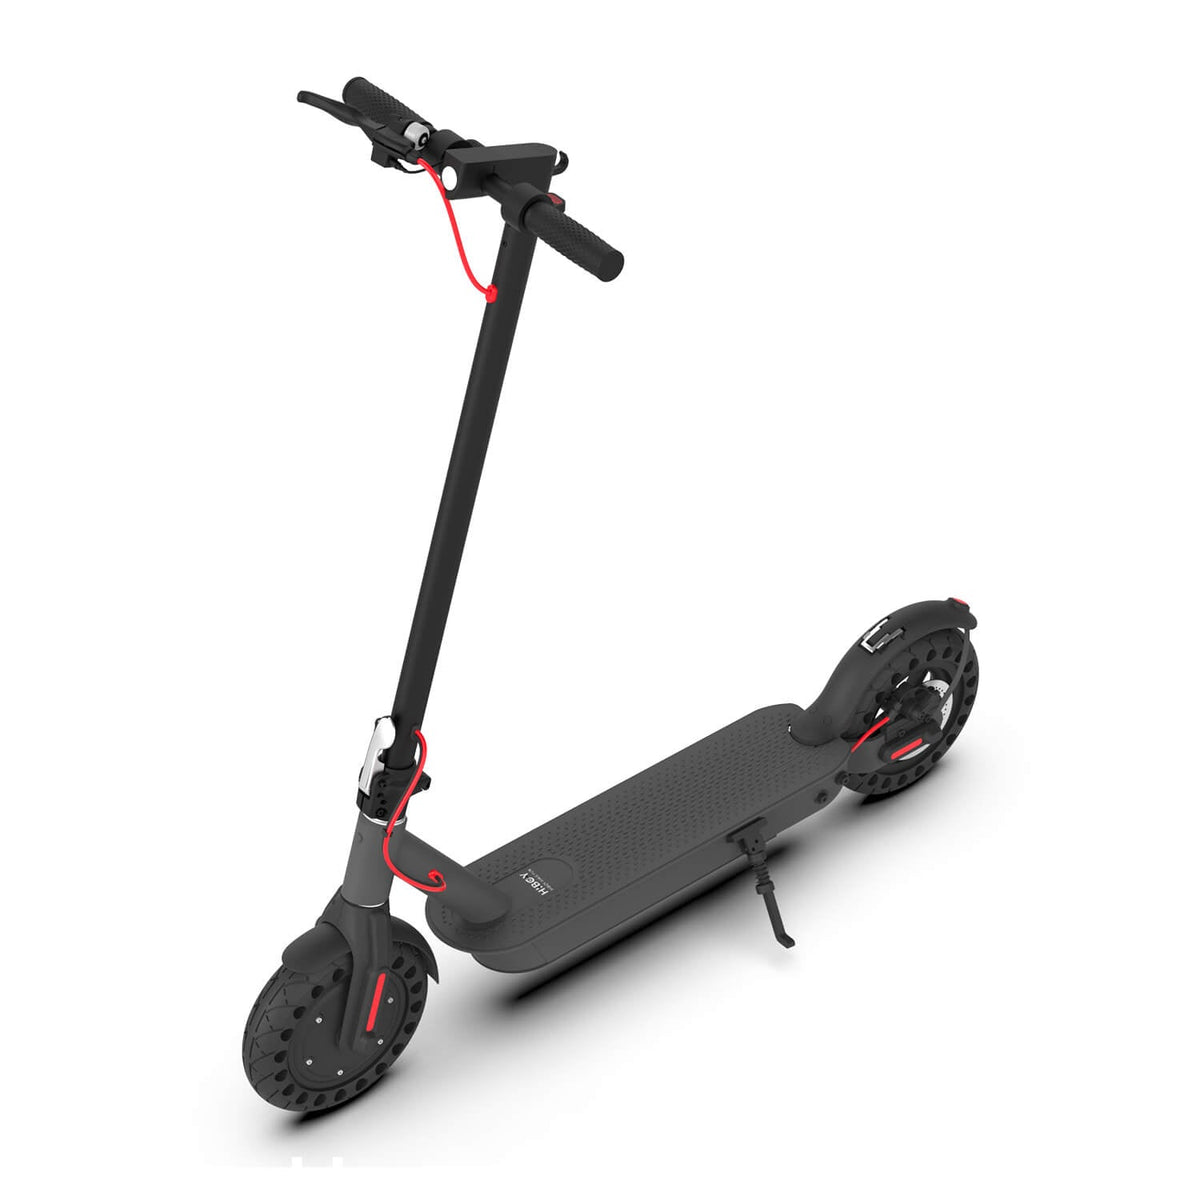 Hiboy S2 Pro Electric Scooter for Commuting, Basic